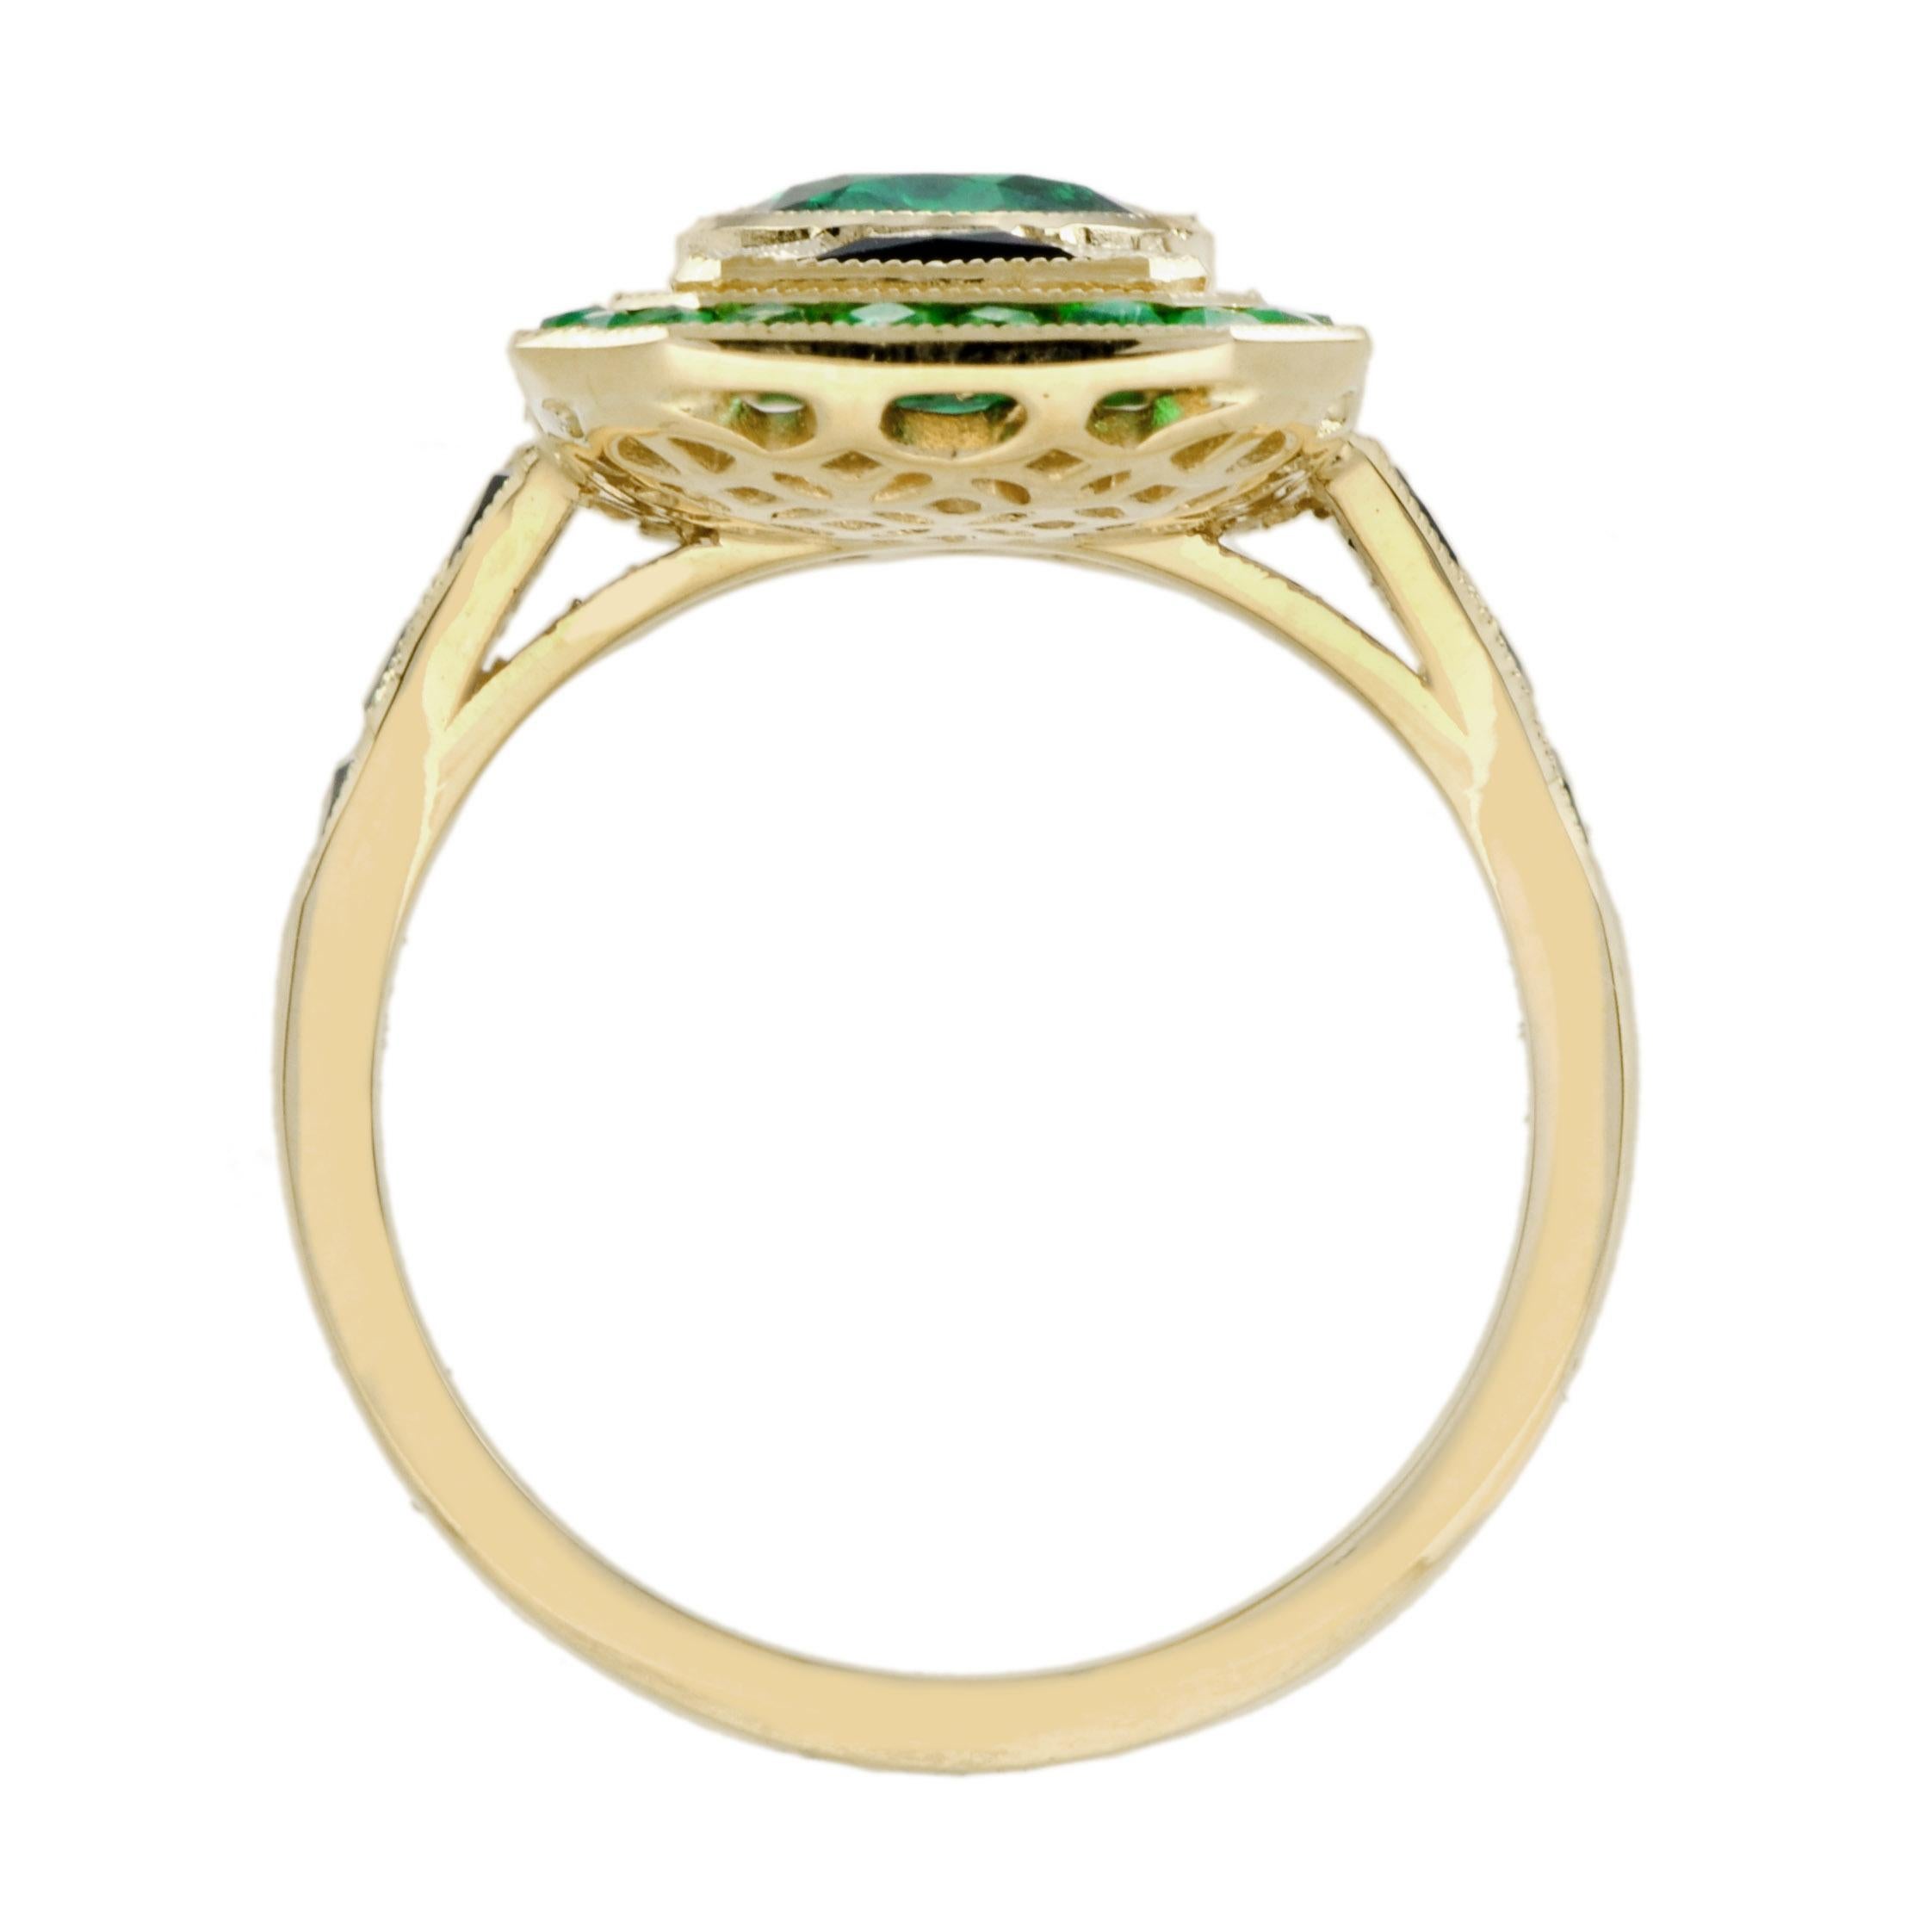 Emerald and Onyx Art Deco Style Ring in 18k Yellow Gold 2